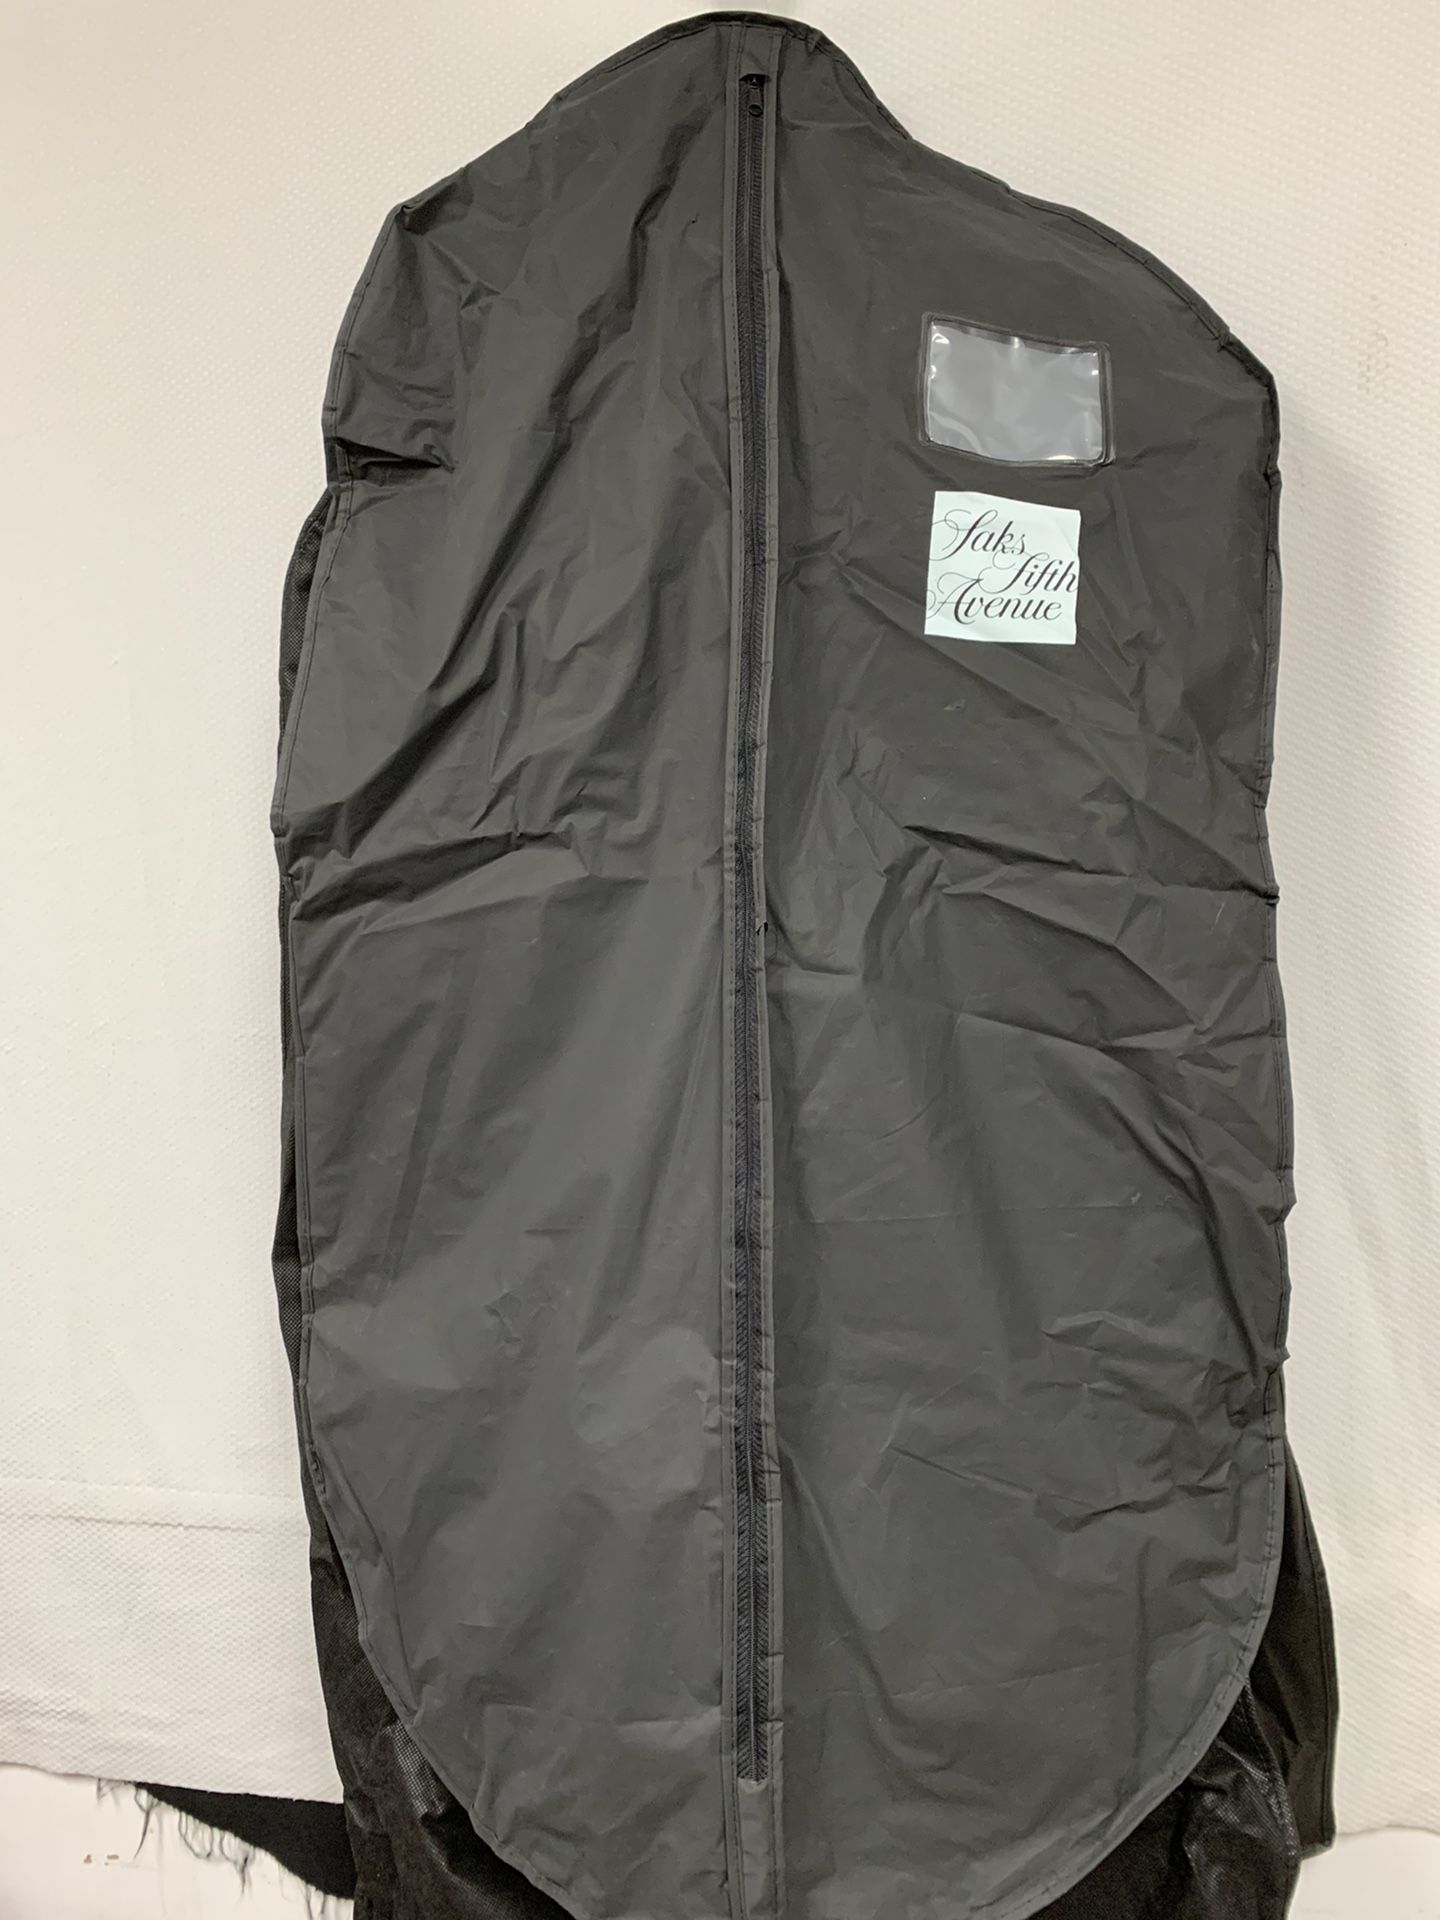 Garment Bags Suit Bag for Travel and Clothing Storage of Dresses, Dress Shirts, Coats— Includes Zipper